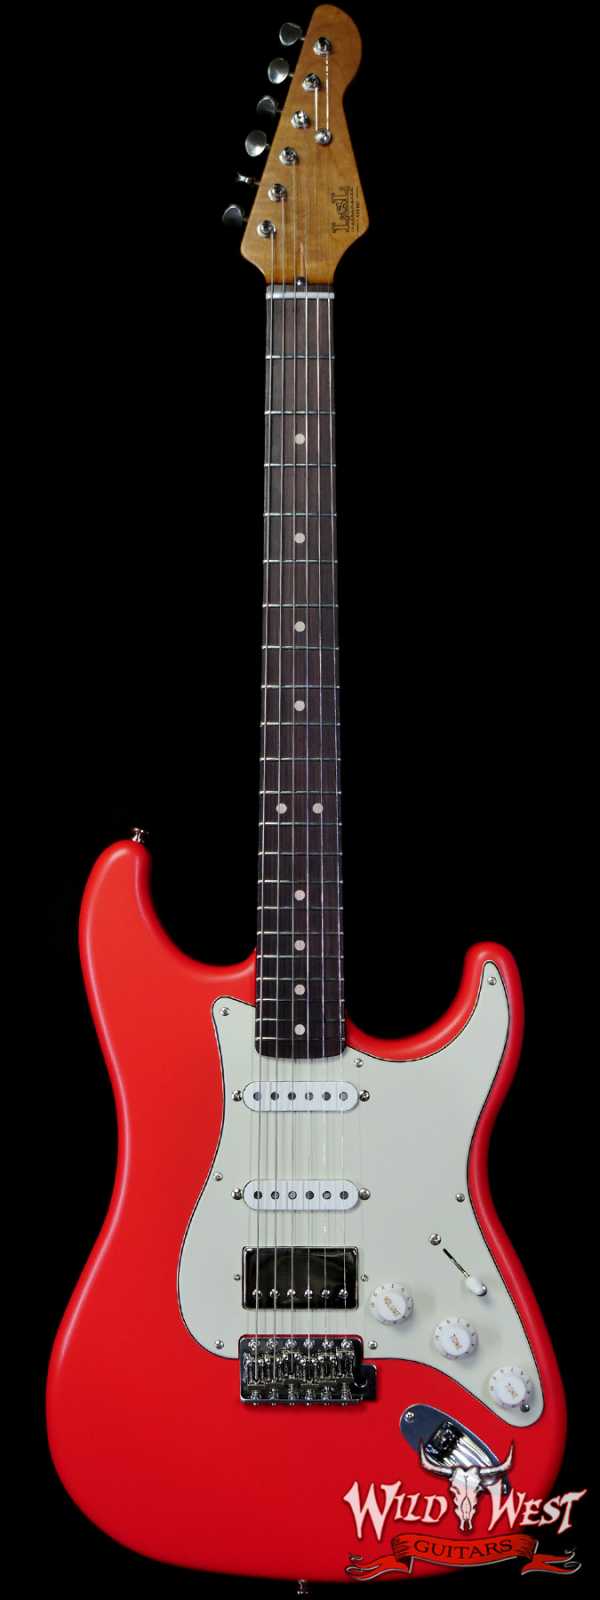 LsL Saticoy One B S Style HSS Roasted Maple Neck Rosewood Fingerboard Fiesta Red